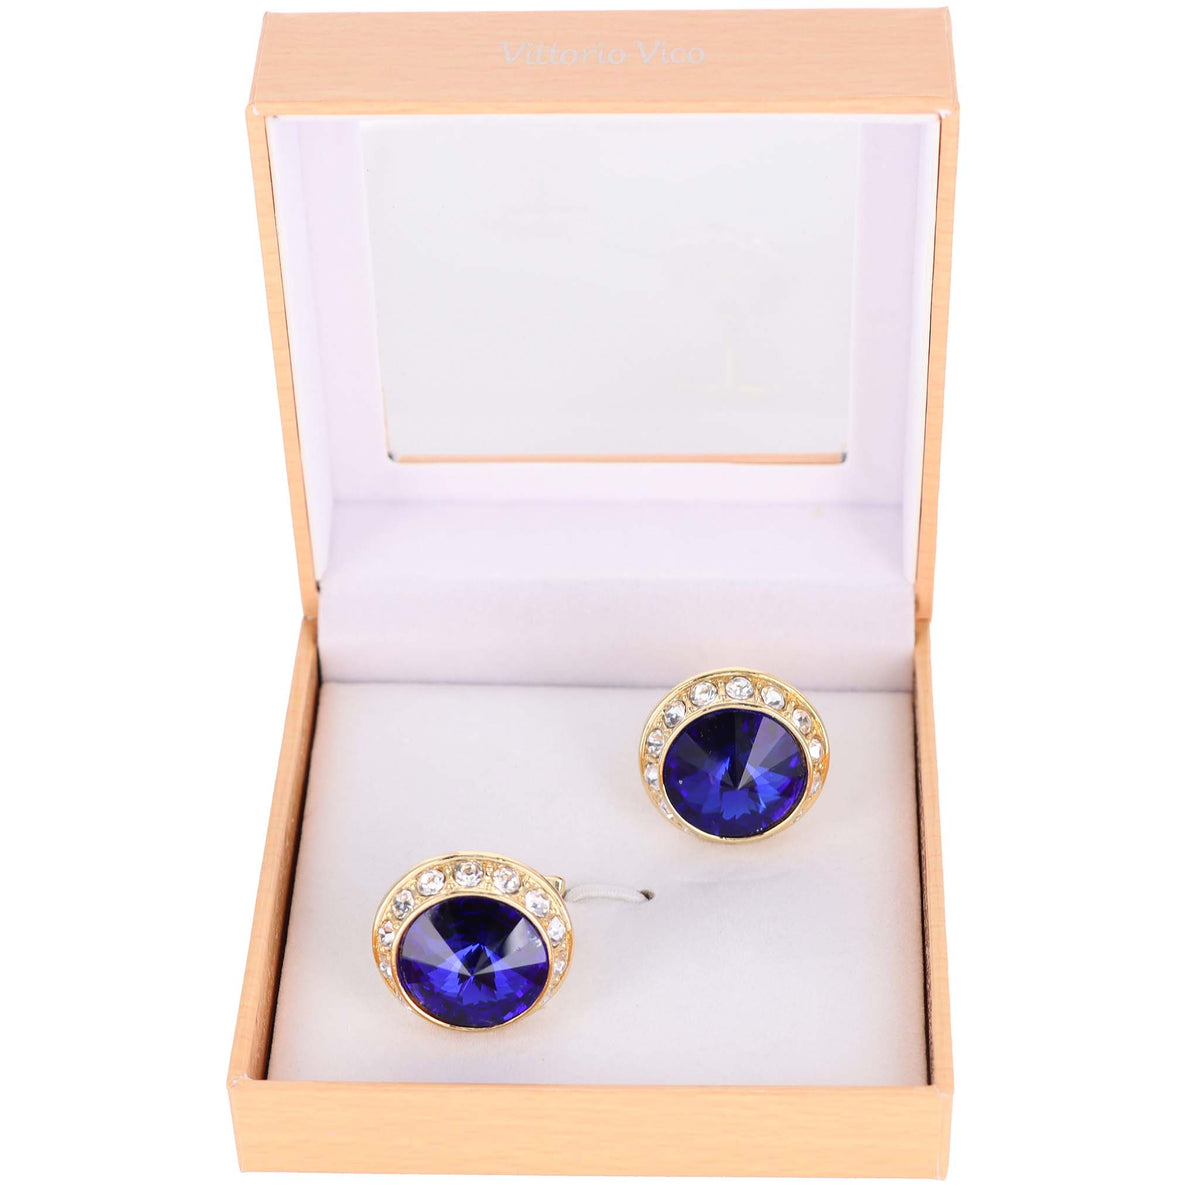 Vittorio Vico Gold &amp; Silver Colorful Bling Cufflinks (CL15XX Series)